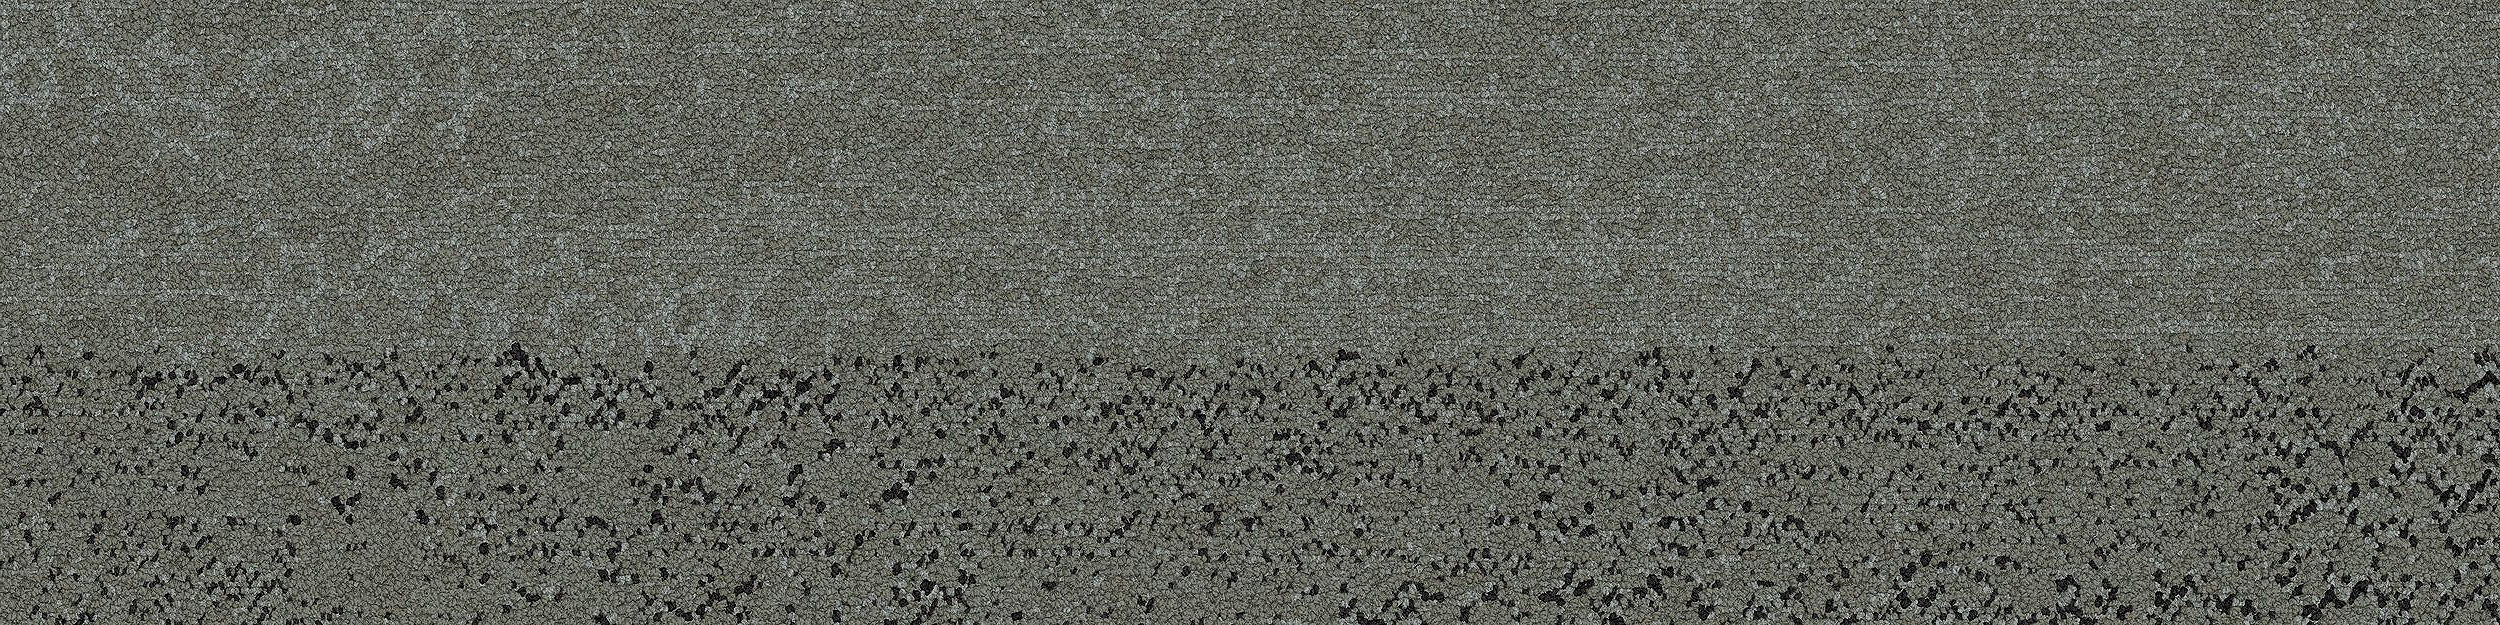 Natures Course Carpet Tile In Fossil image number 5